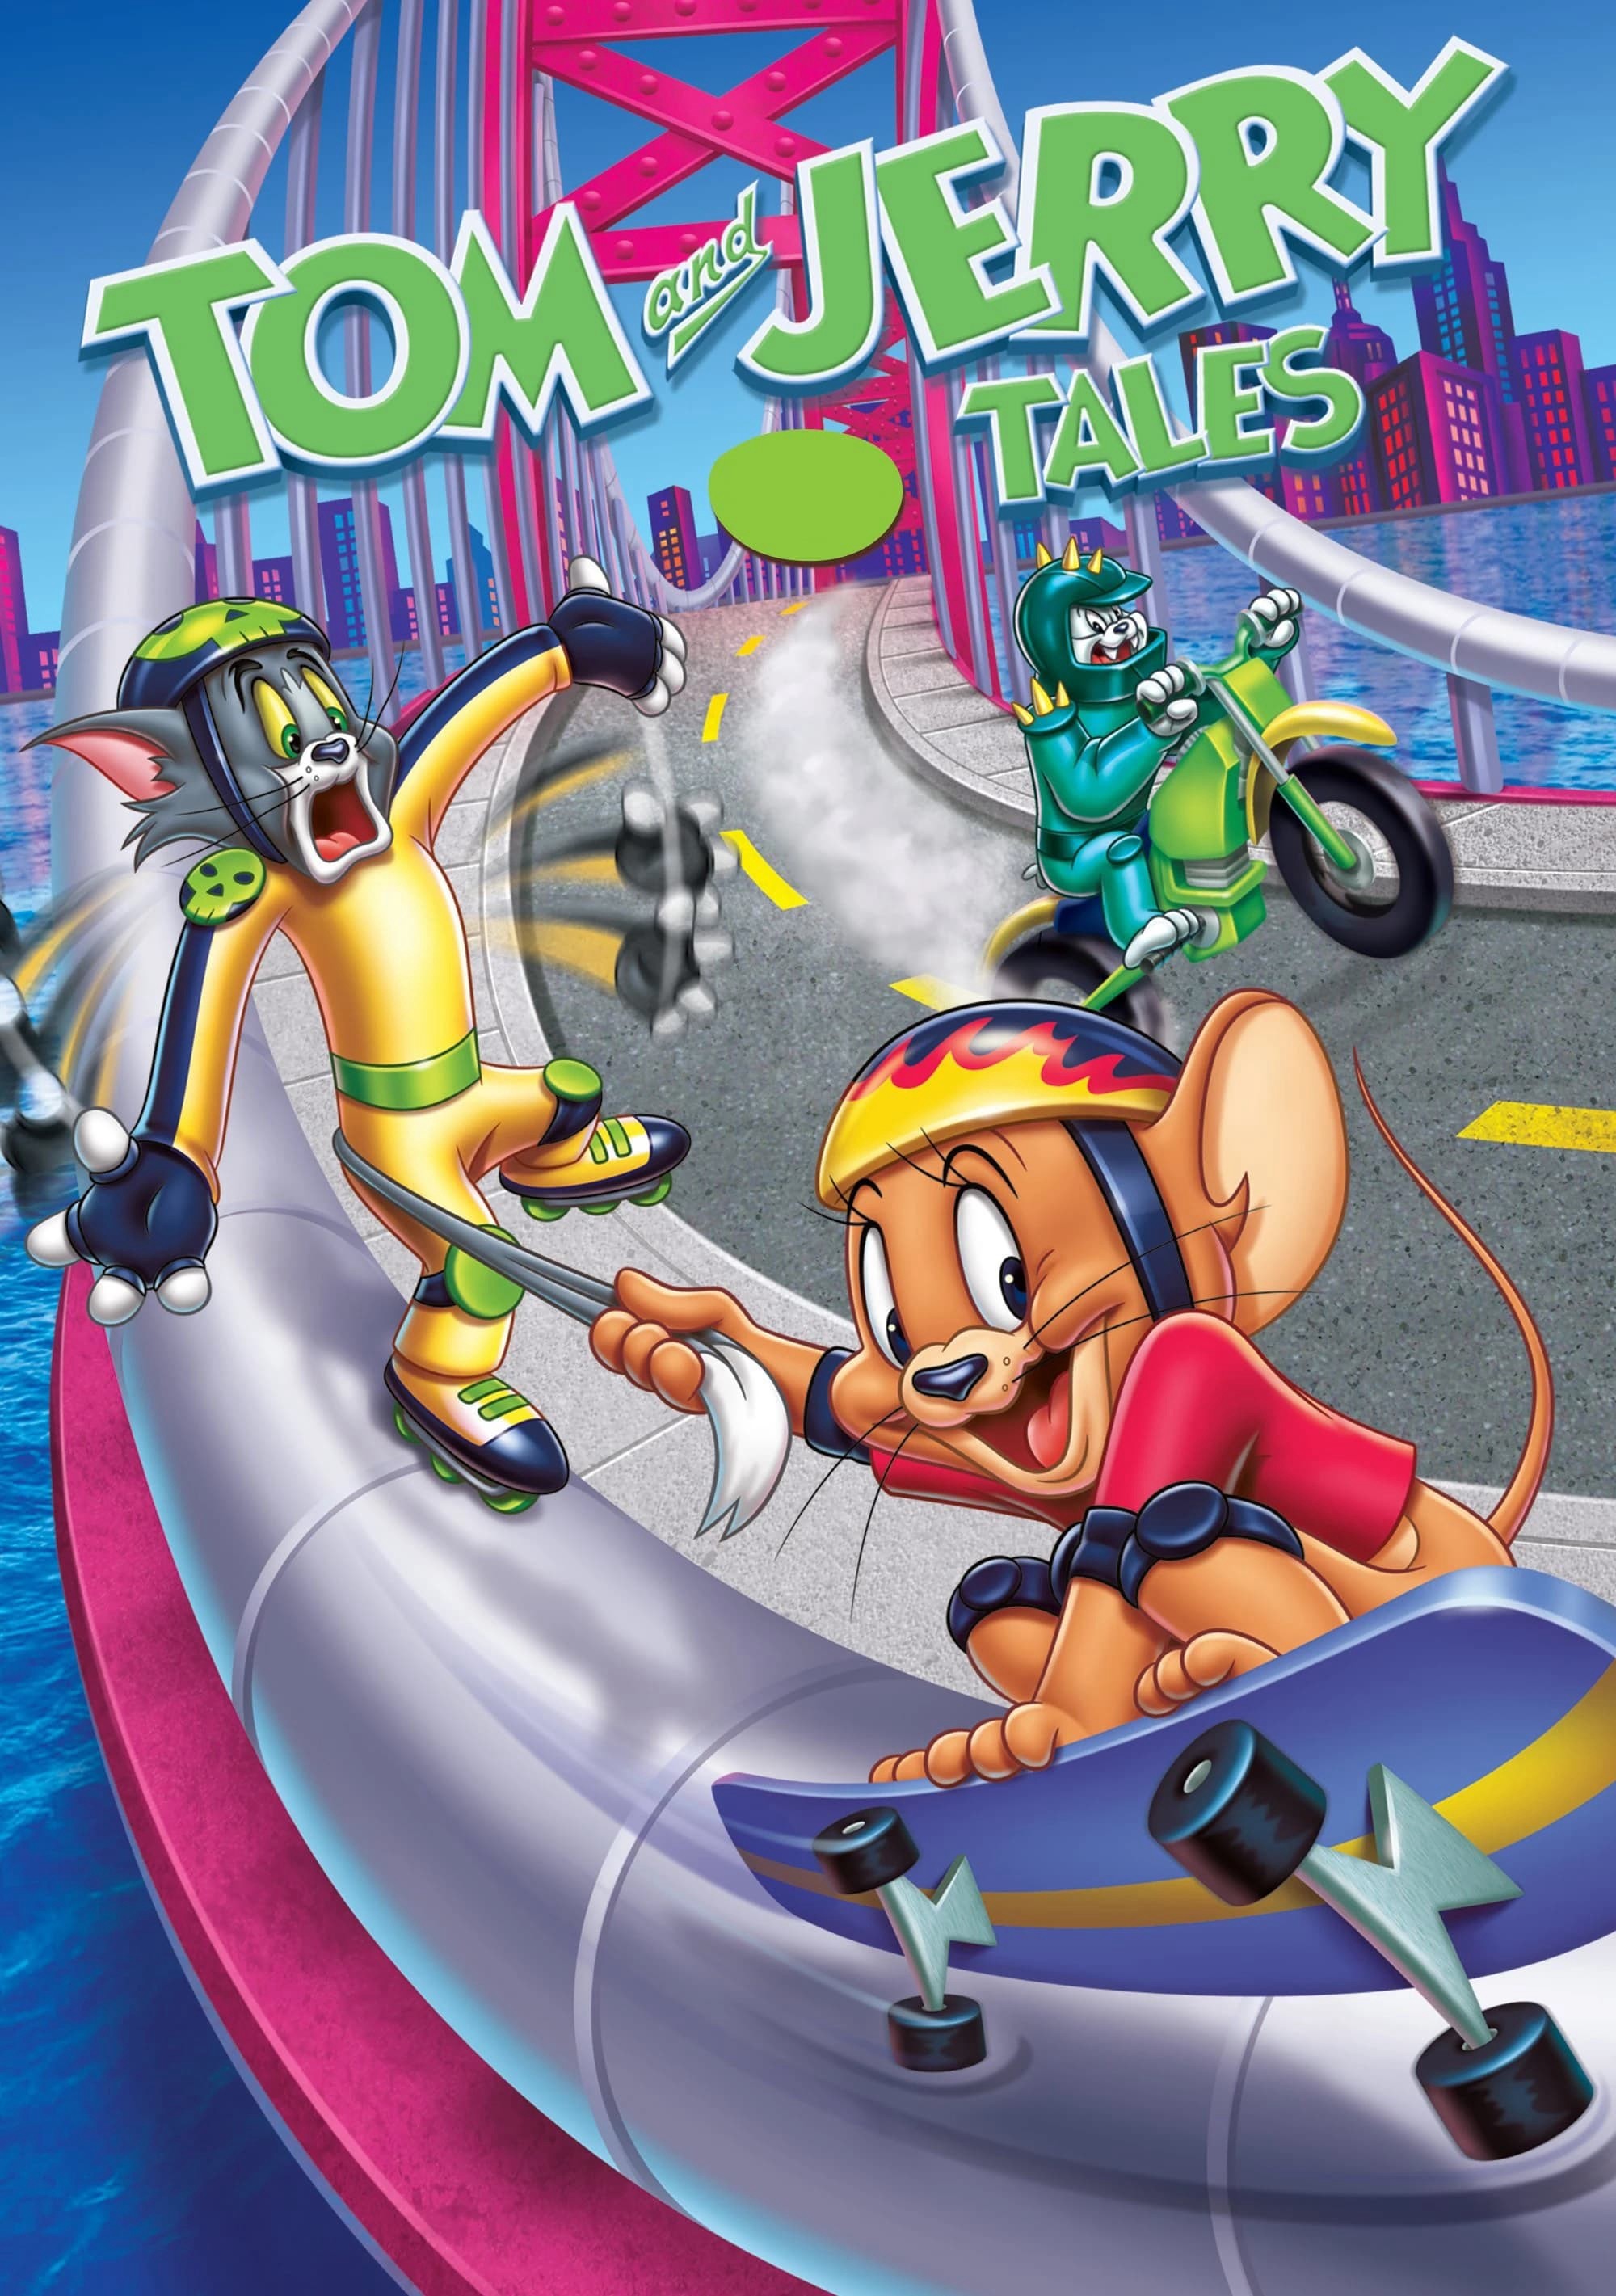 Tom and Jerry Tales (Phần 1) 2006